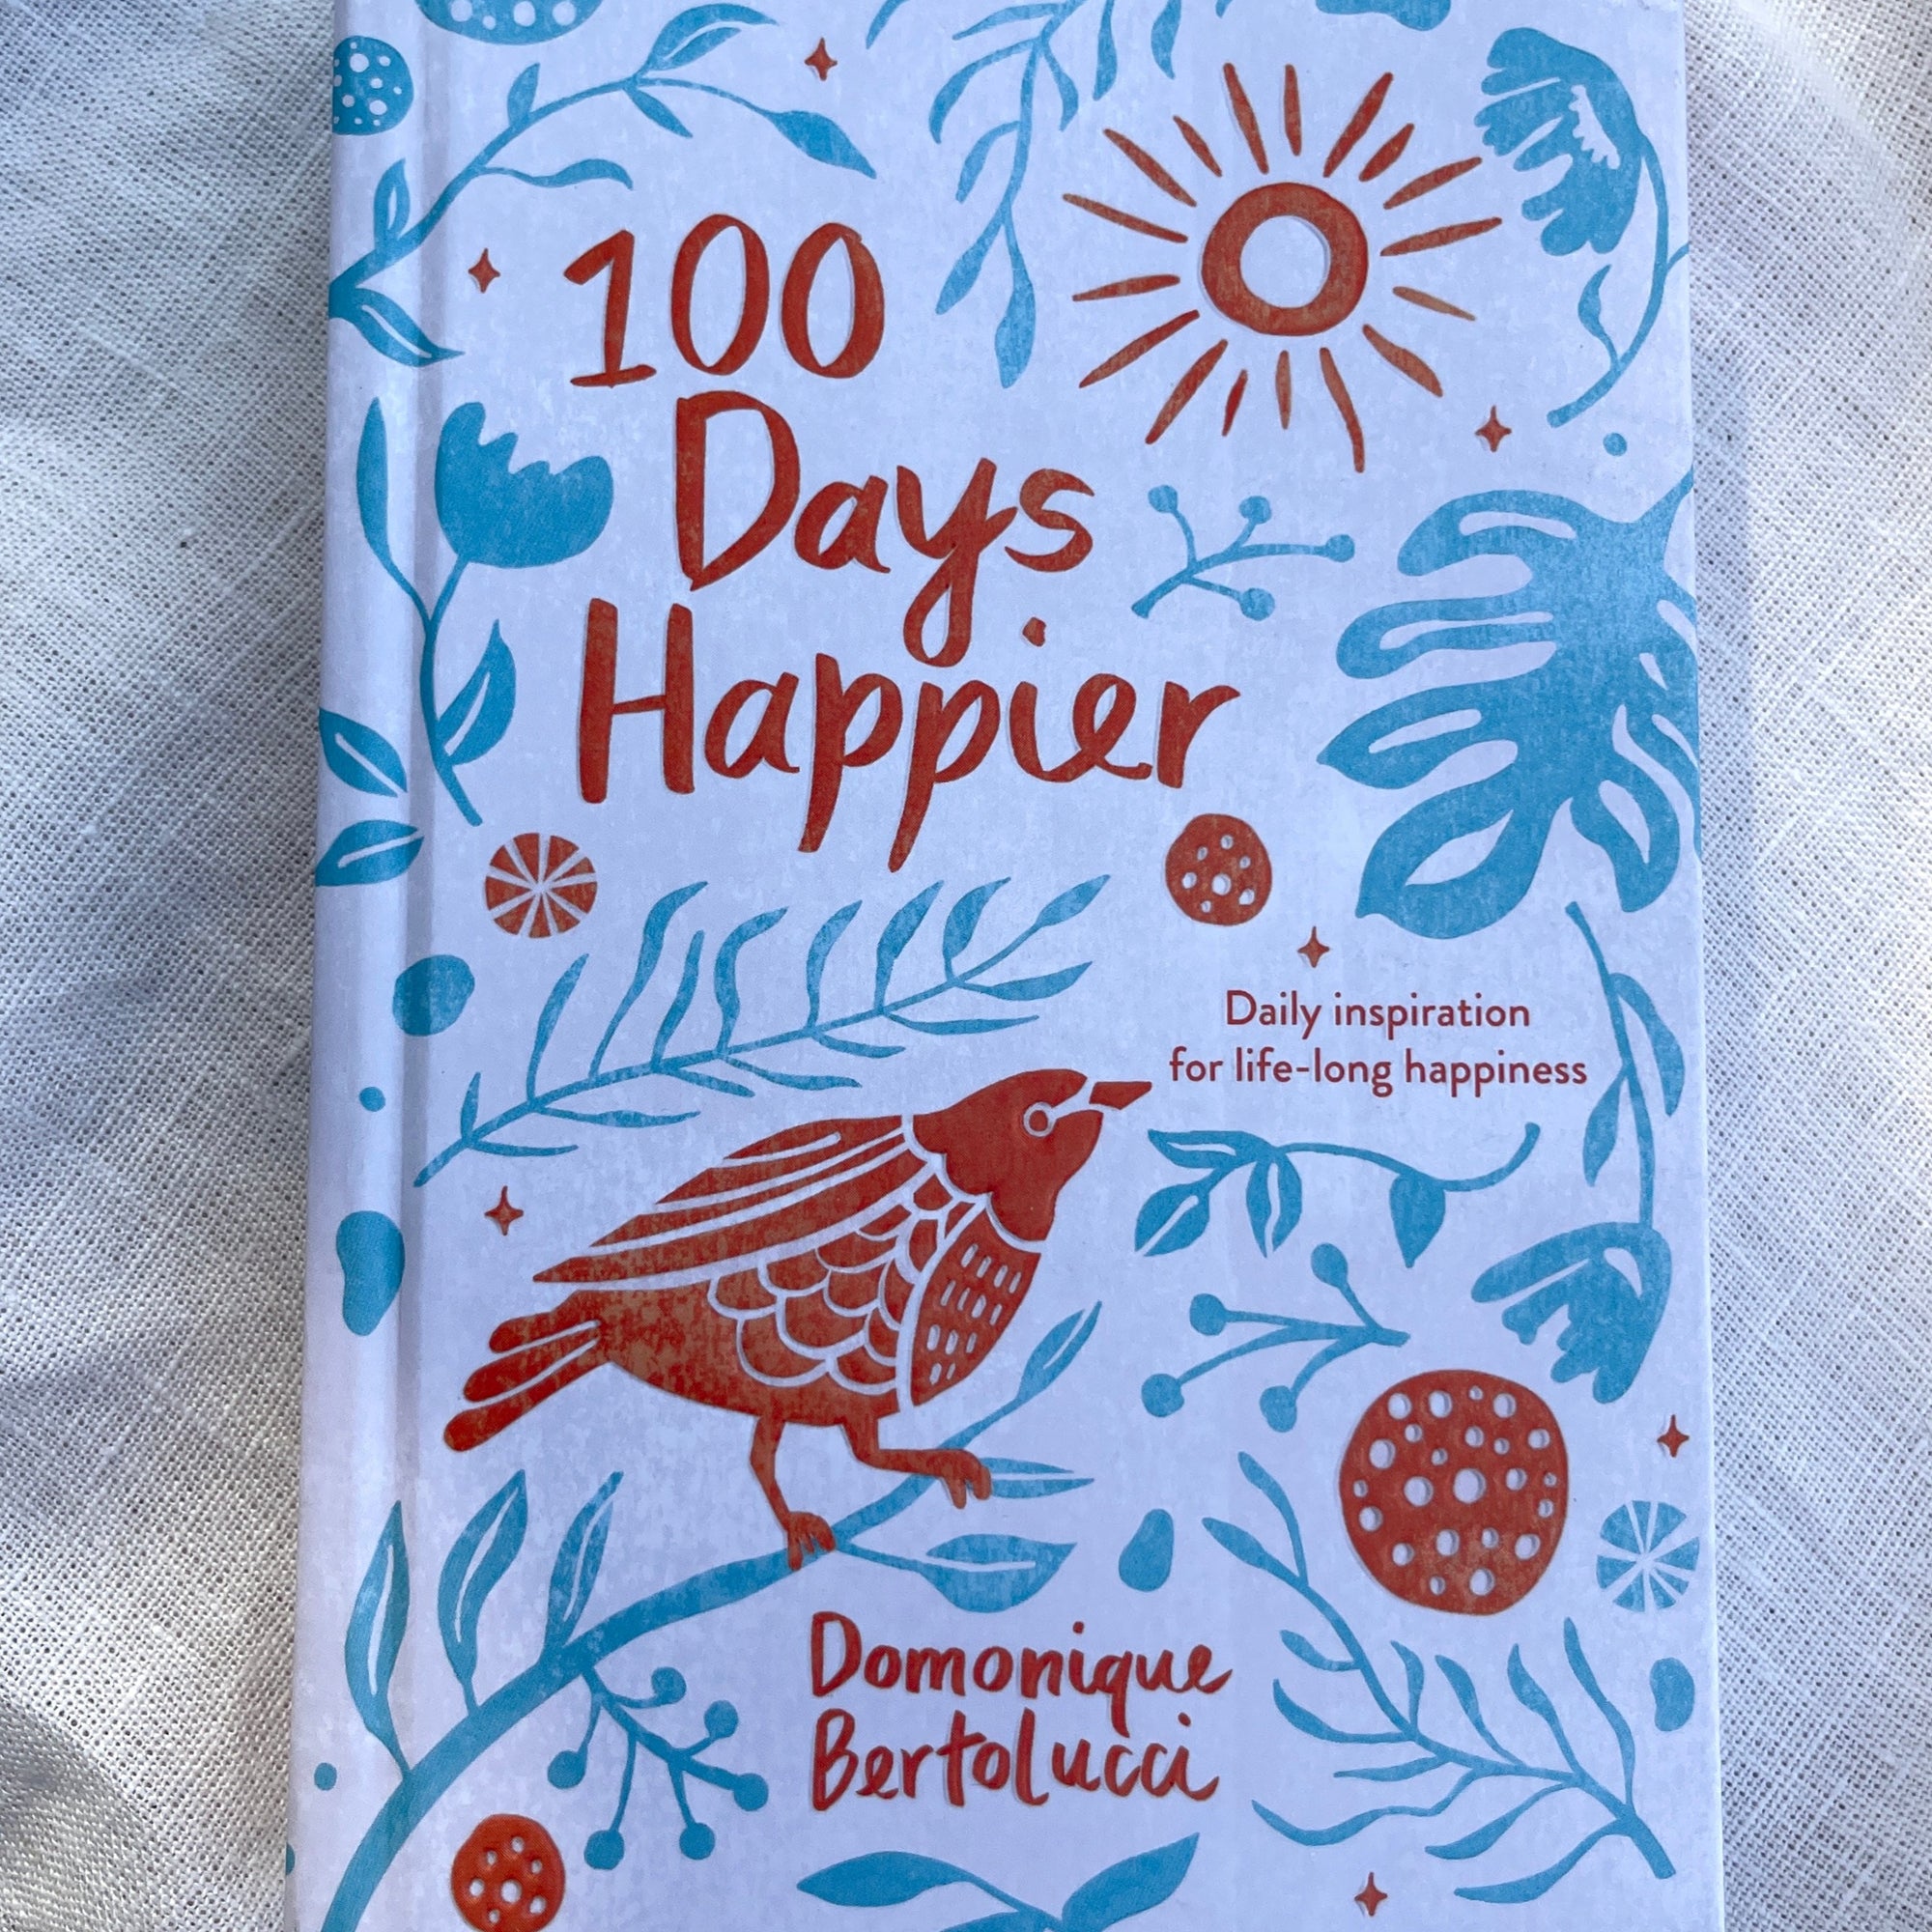 100 Days Happier book daily inspiration for life long happiness by domonique bertolucci